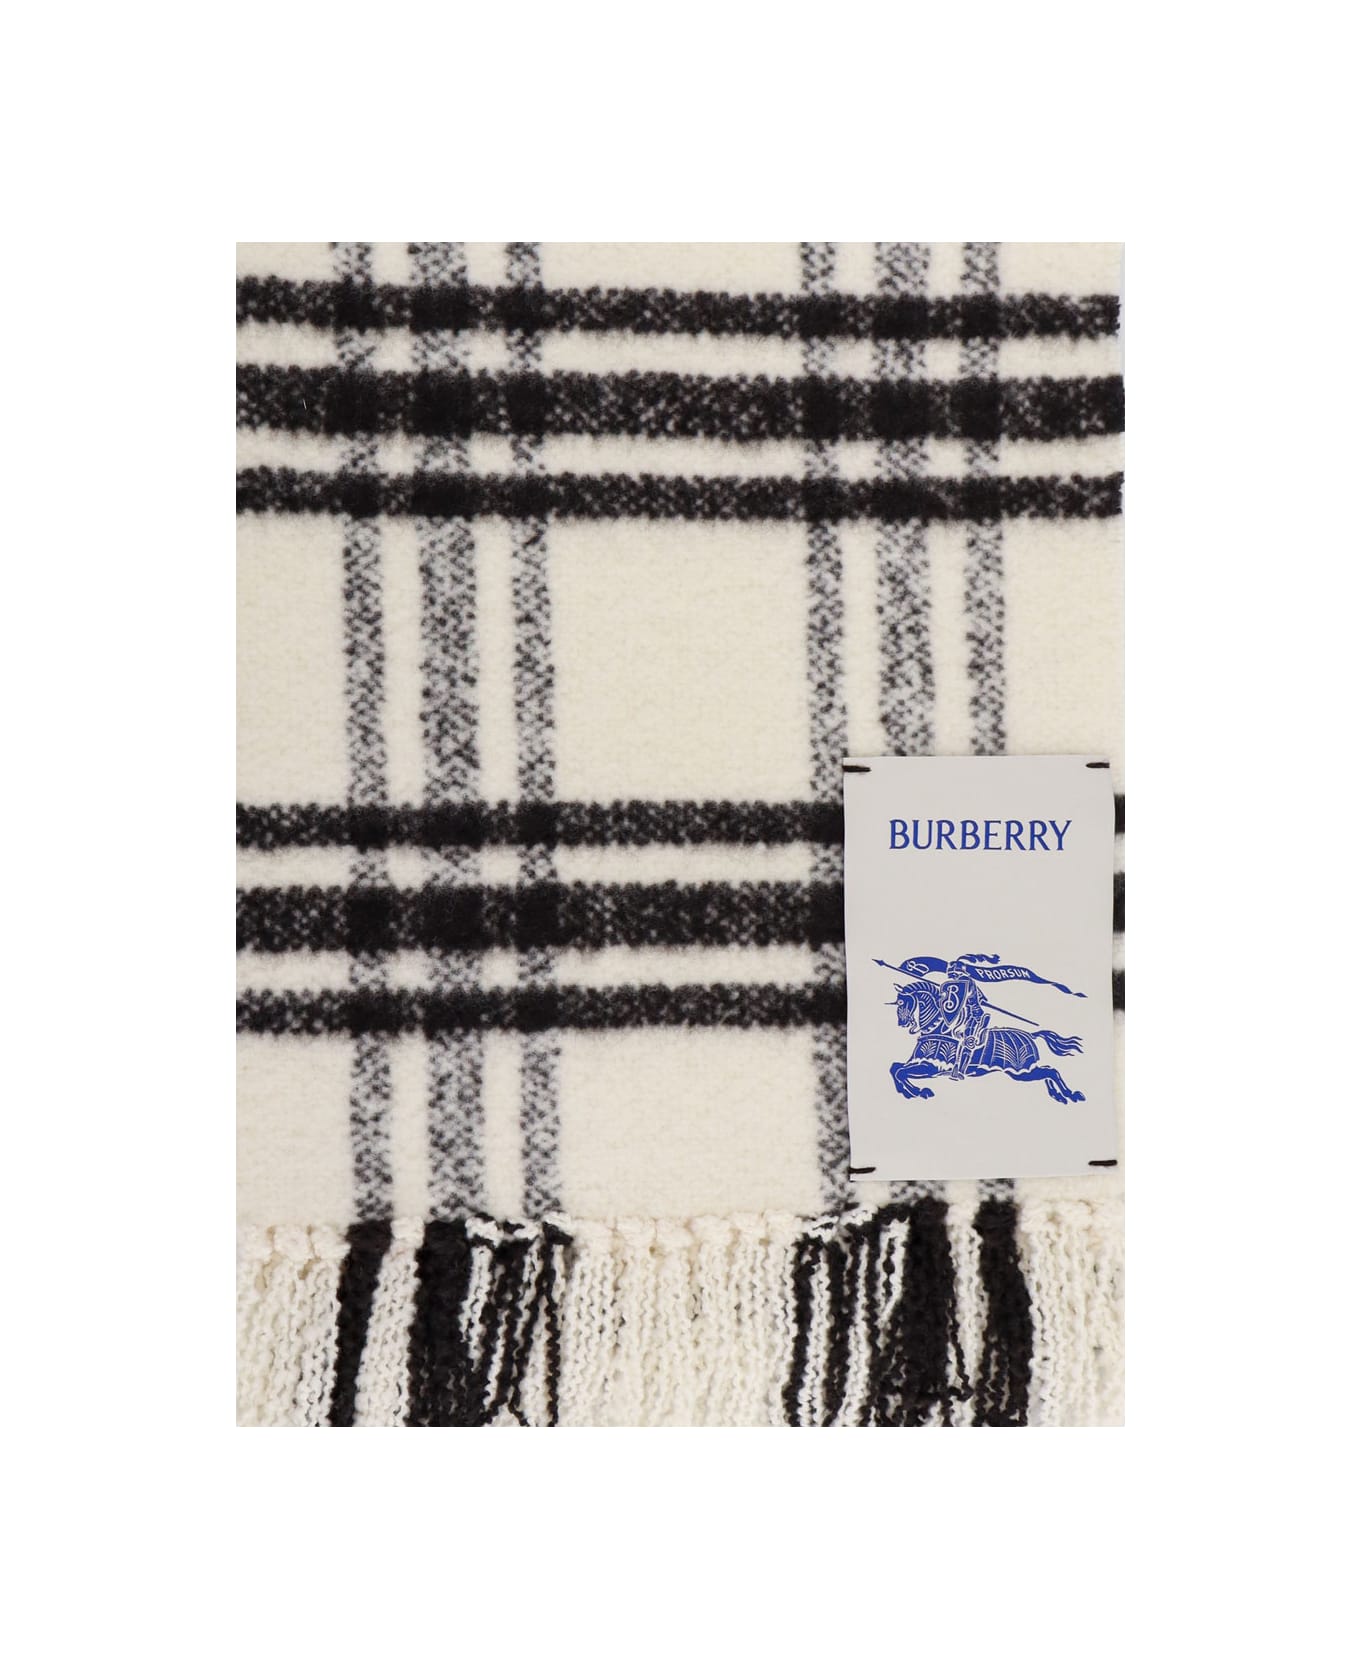 Burberry Scarf - Otter